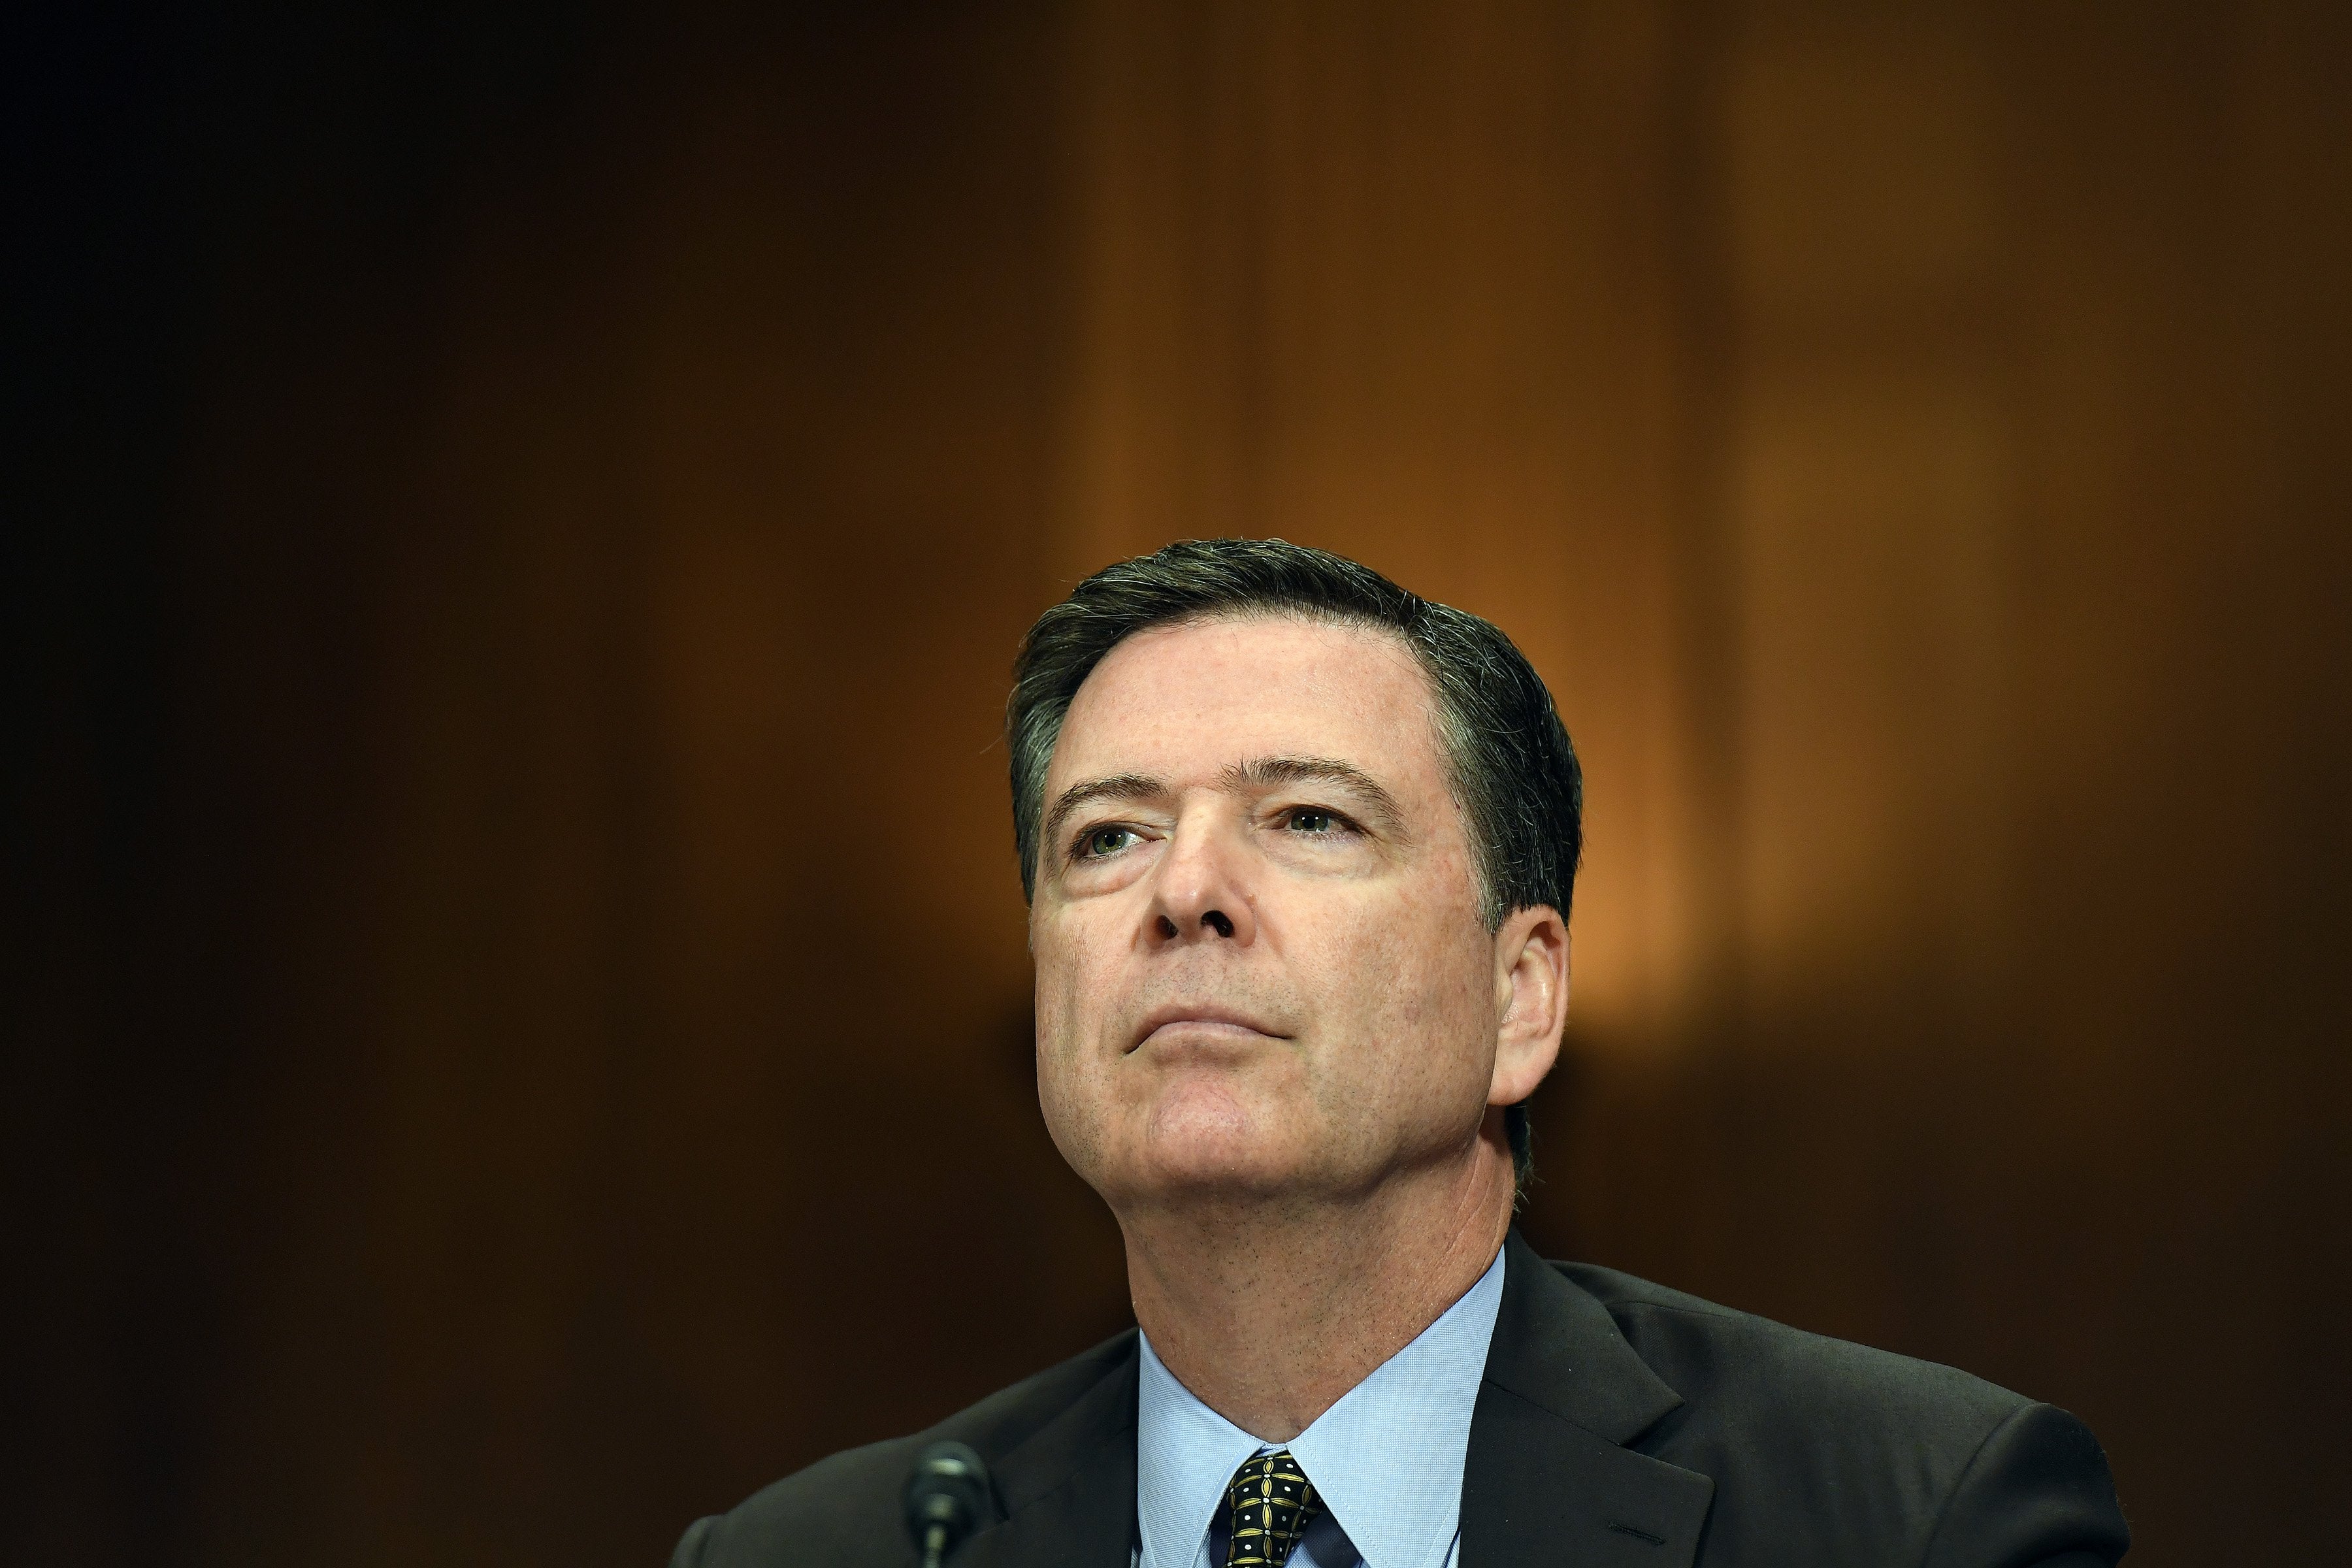 James Comey Plans To Testify About His Conversations With President Trump
